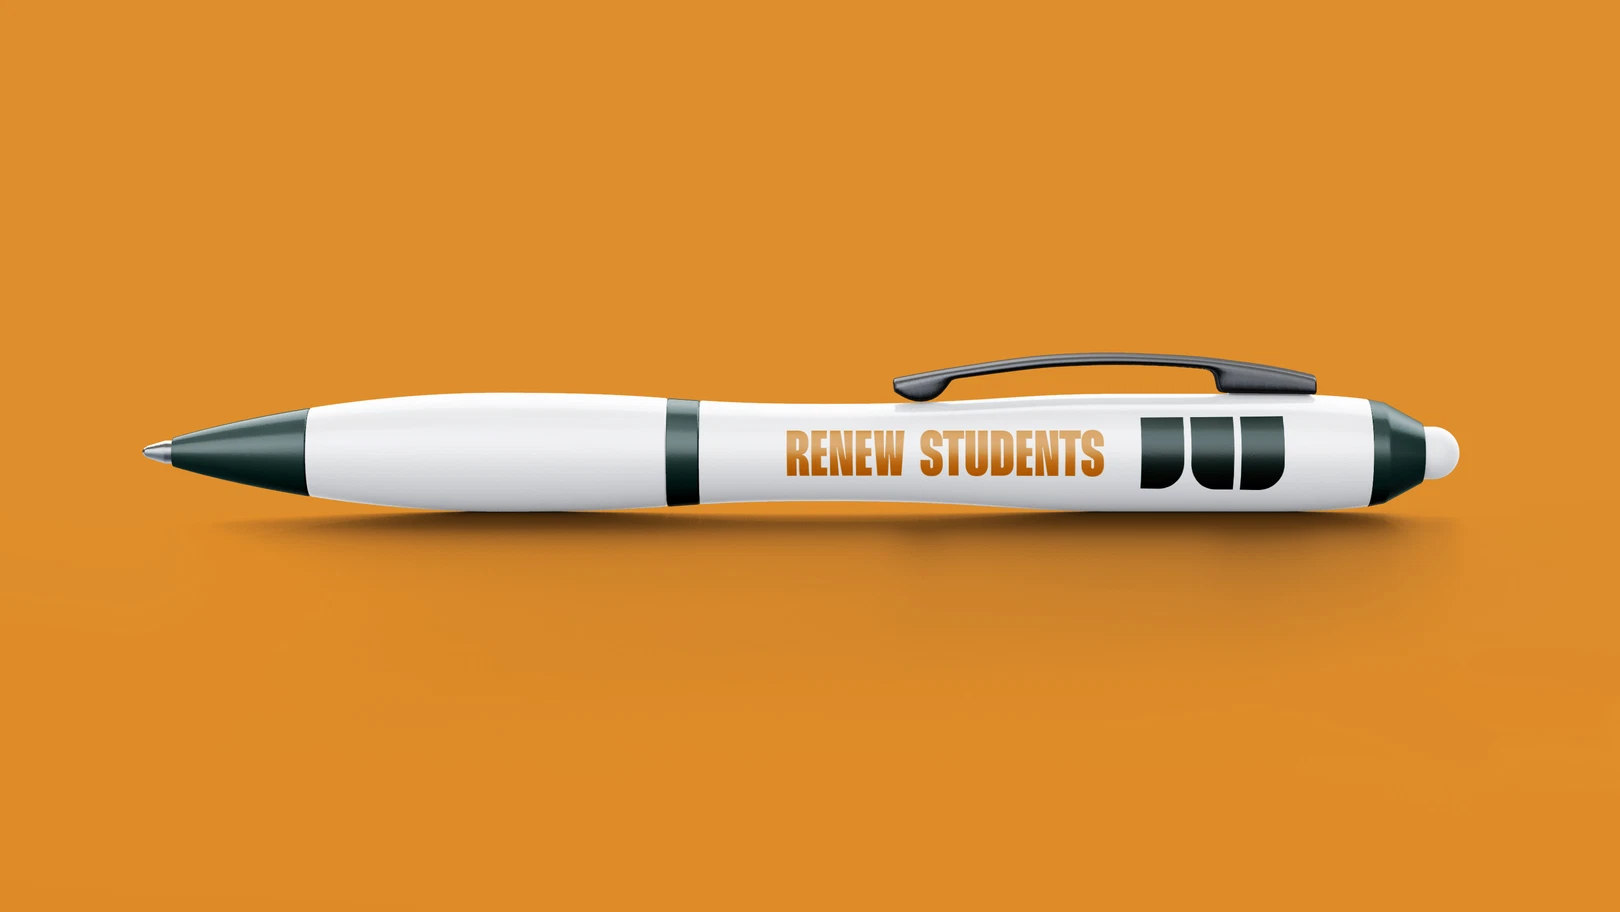 A white ben with forest green colors and the Renew Students logo icon on an orange background.